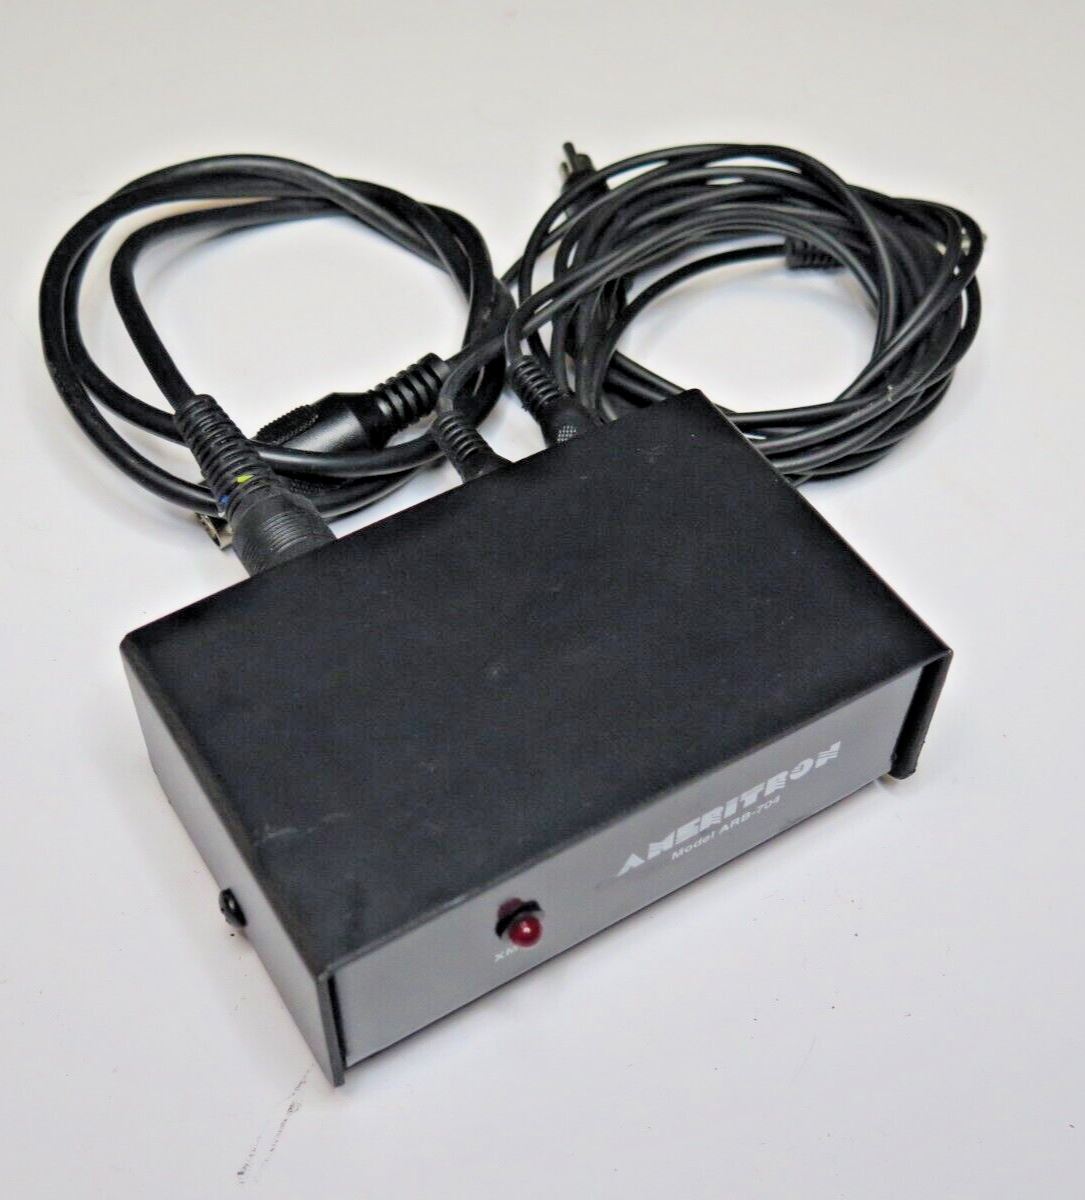 Ameritron Amplifier Transceiver Keying Interface ARB-704